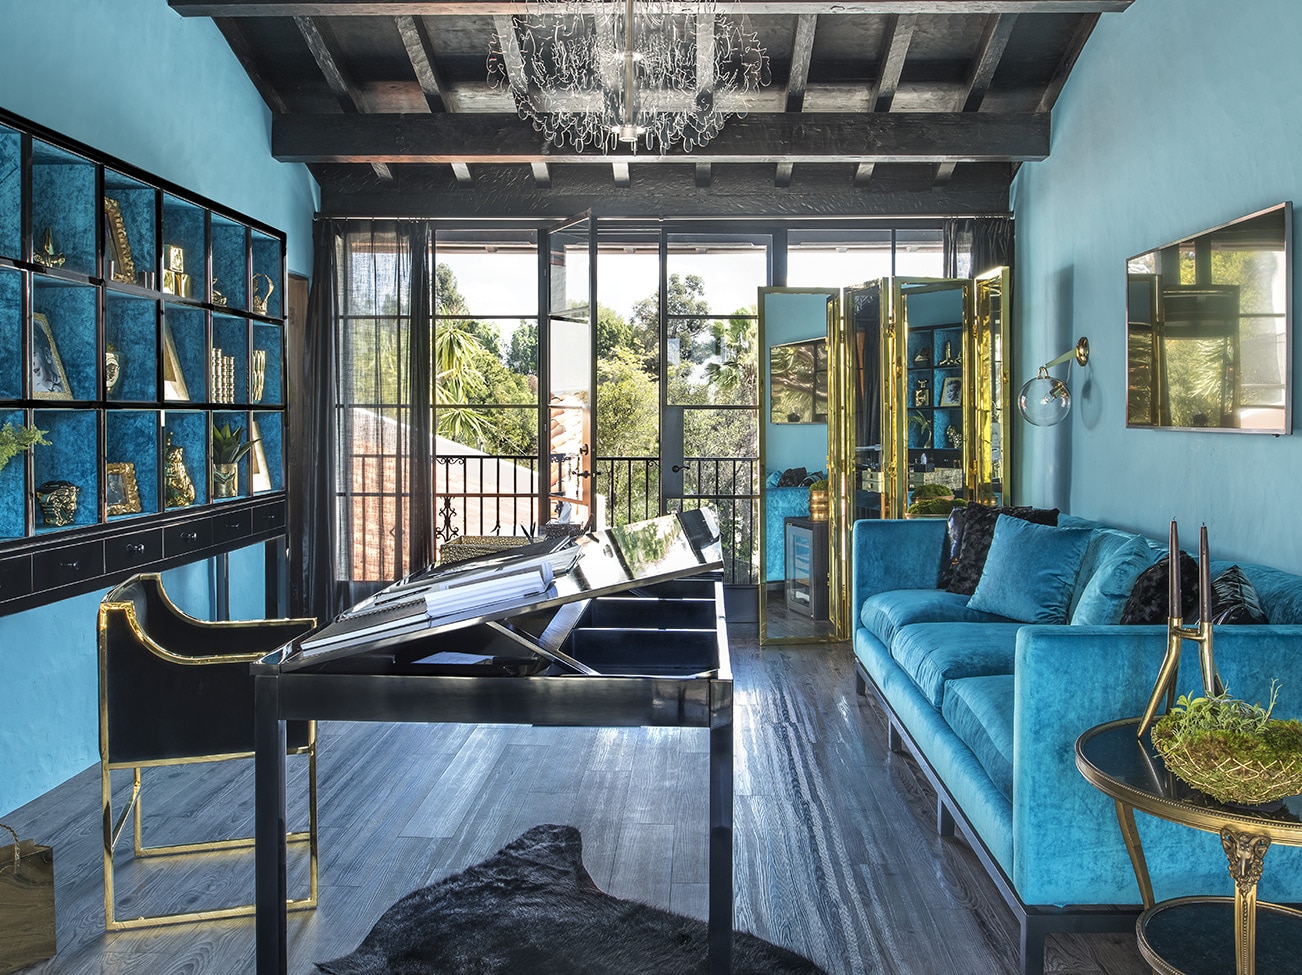   Turquoise-painted room with black beamed ceiling, blue tuxedo sofa, ebony tilt top desk, and doors opening to an exterior view.